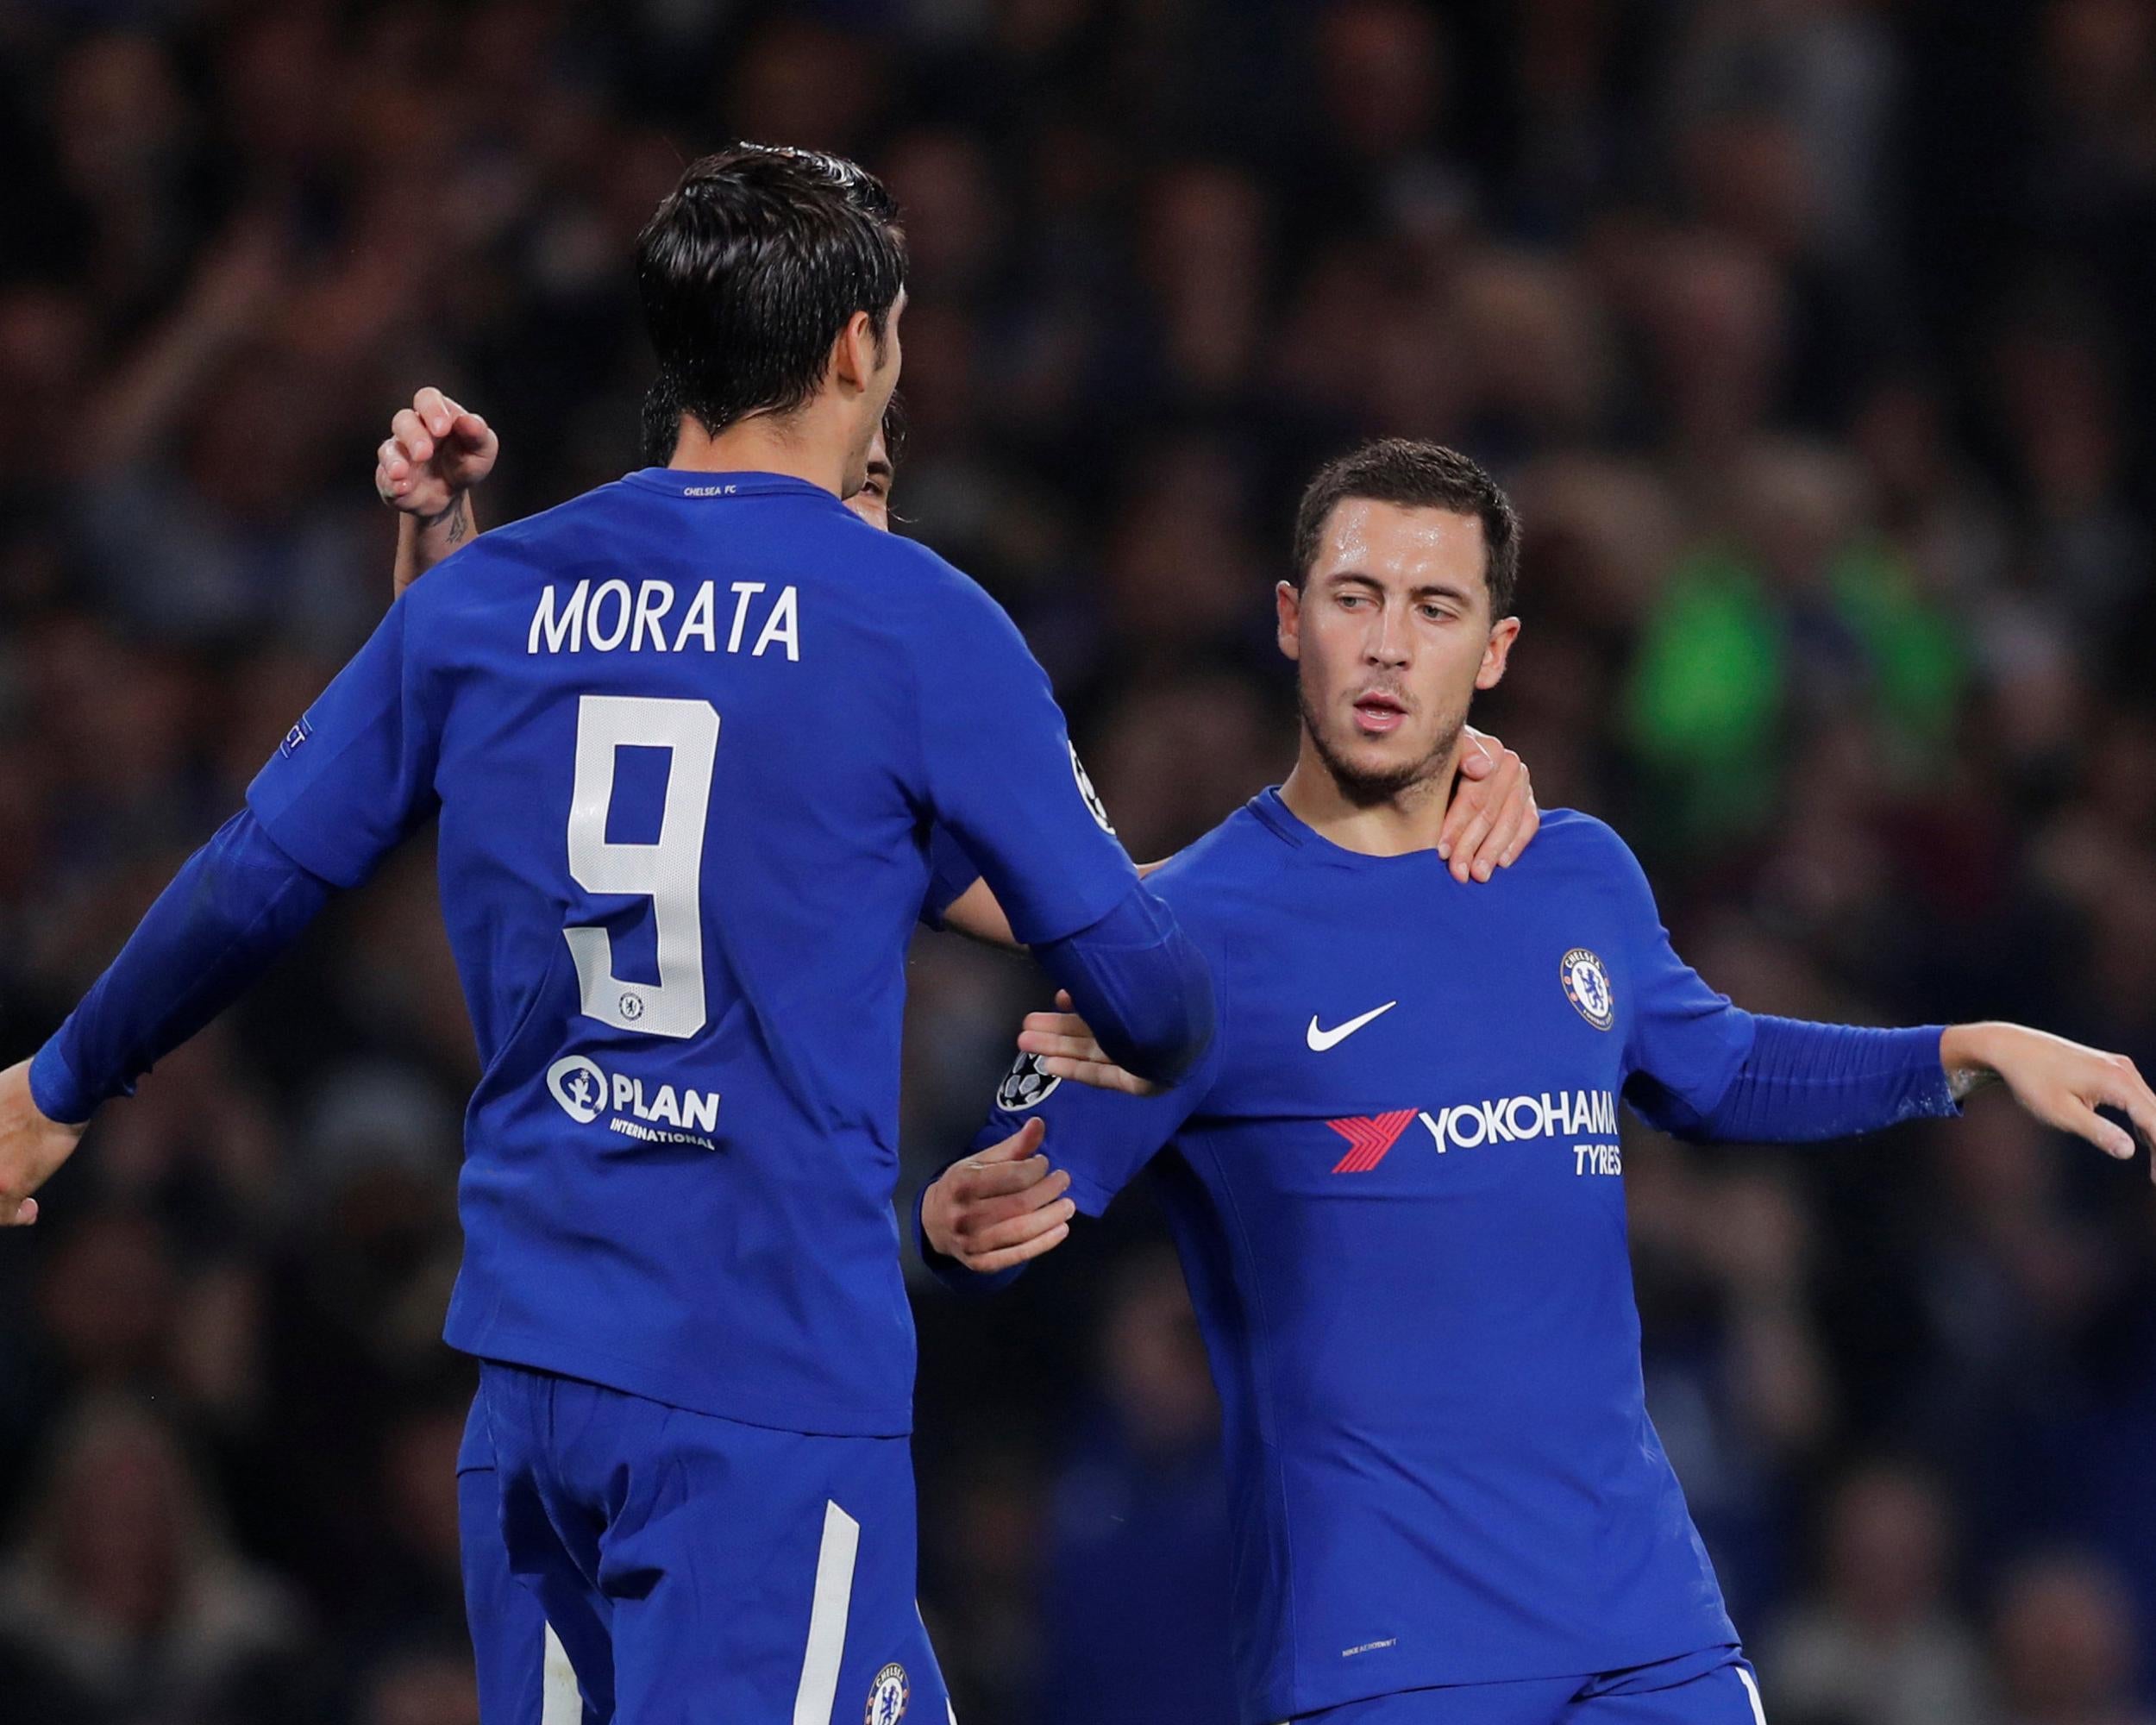 Morata and Hazard enjoy playing with each other but still need time